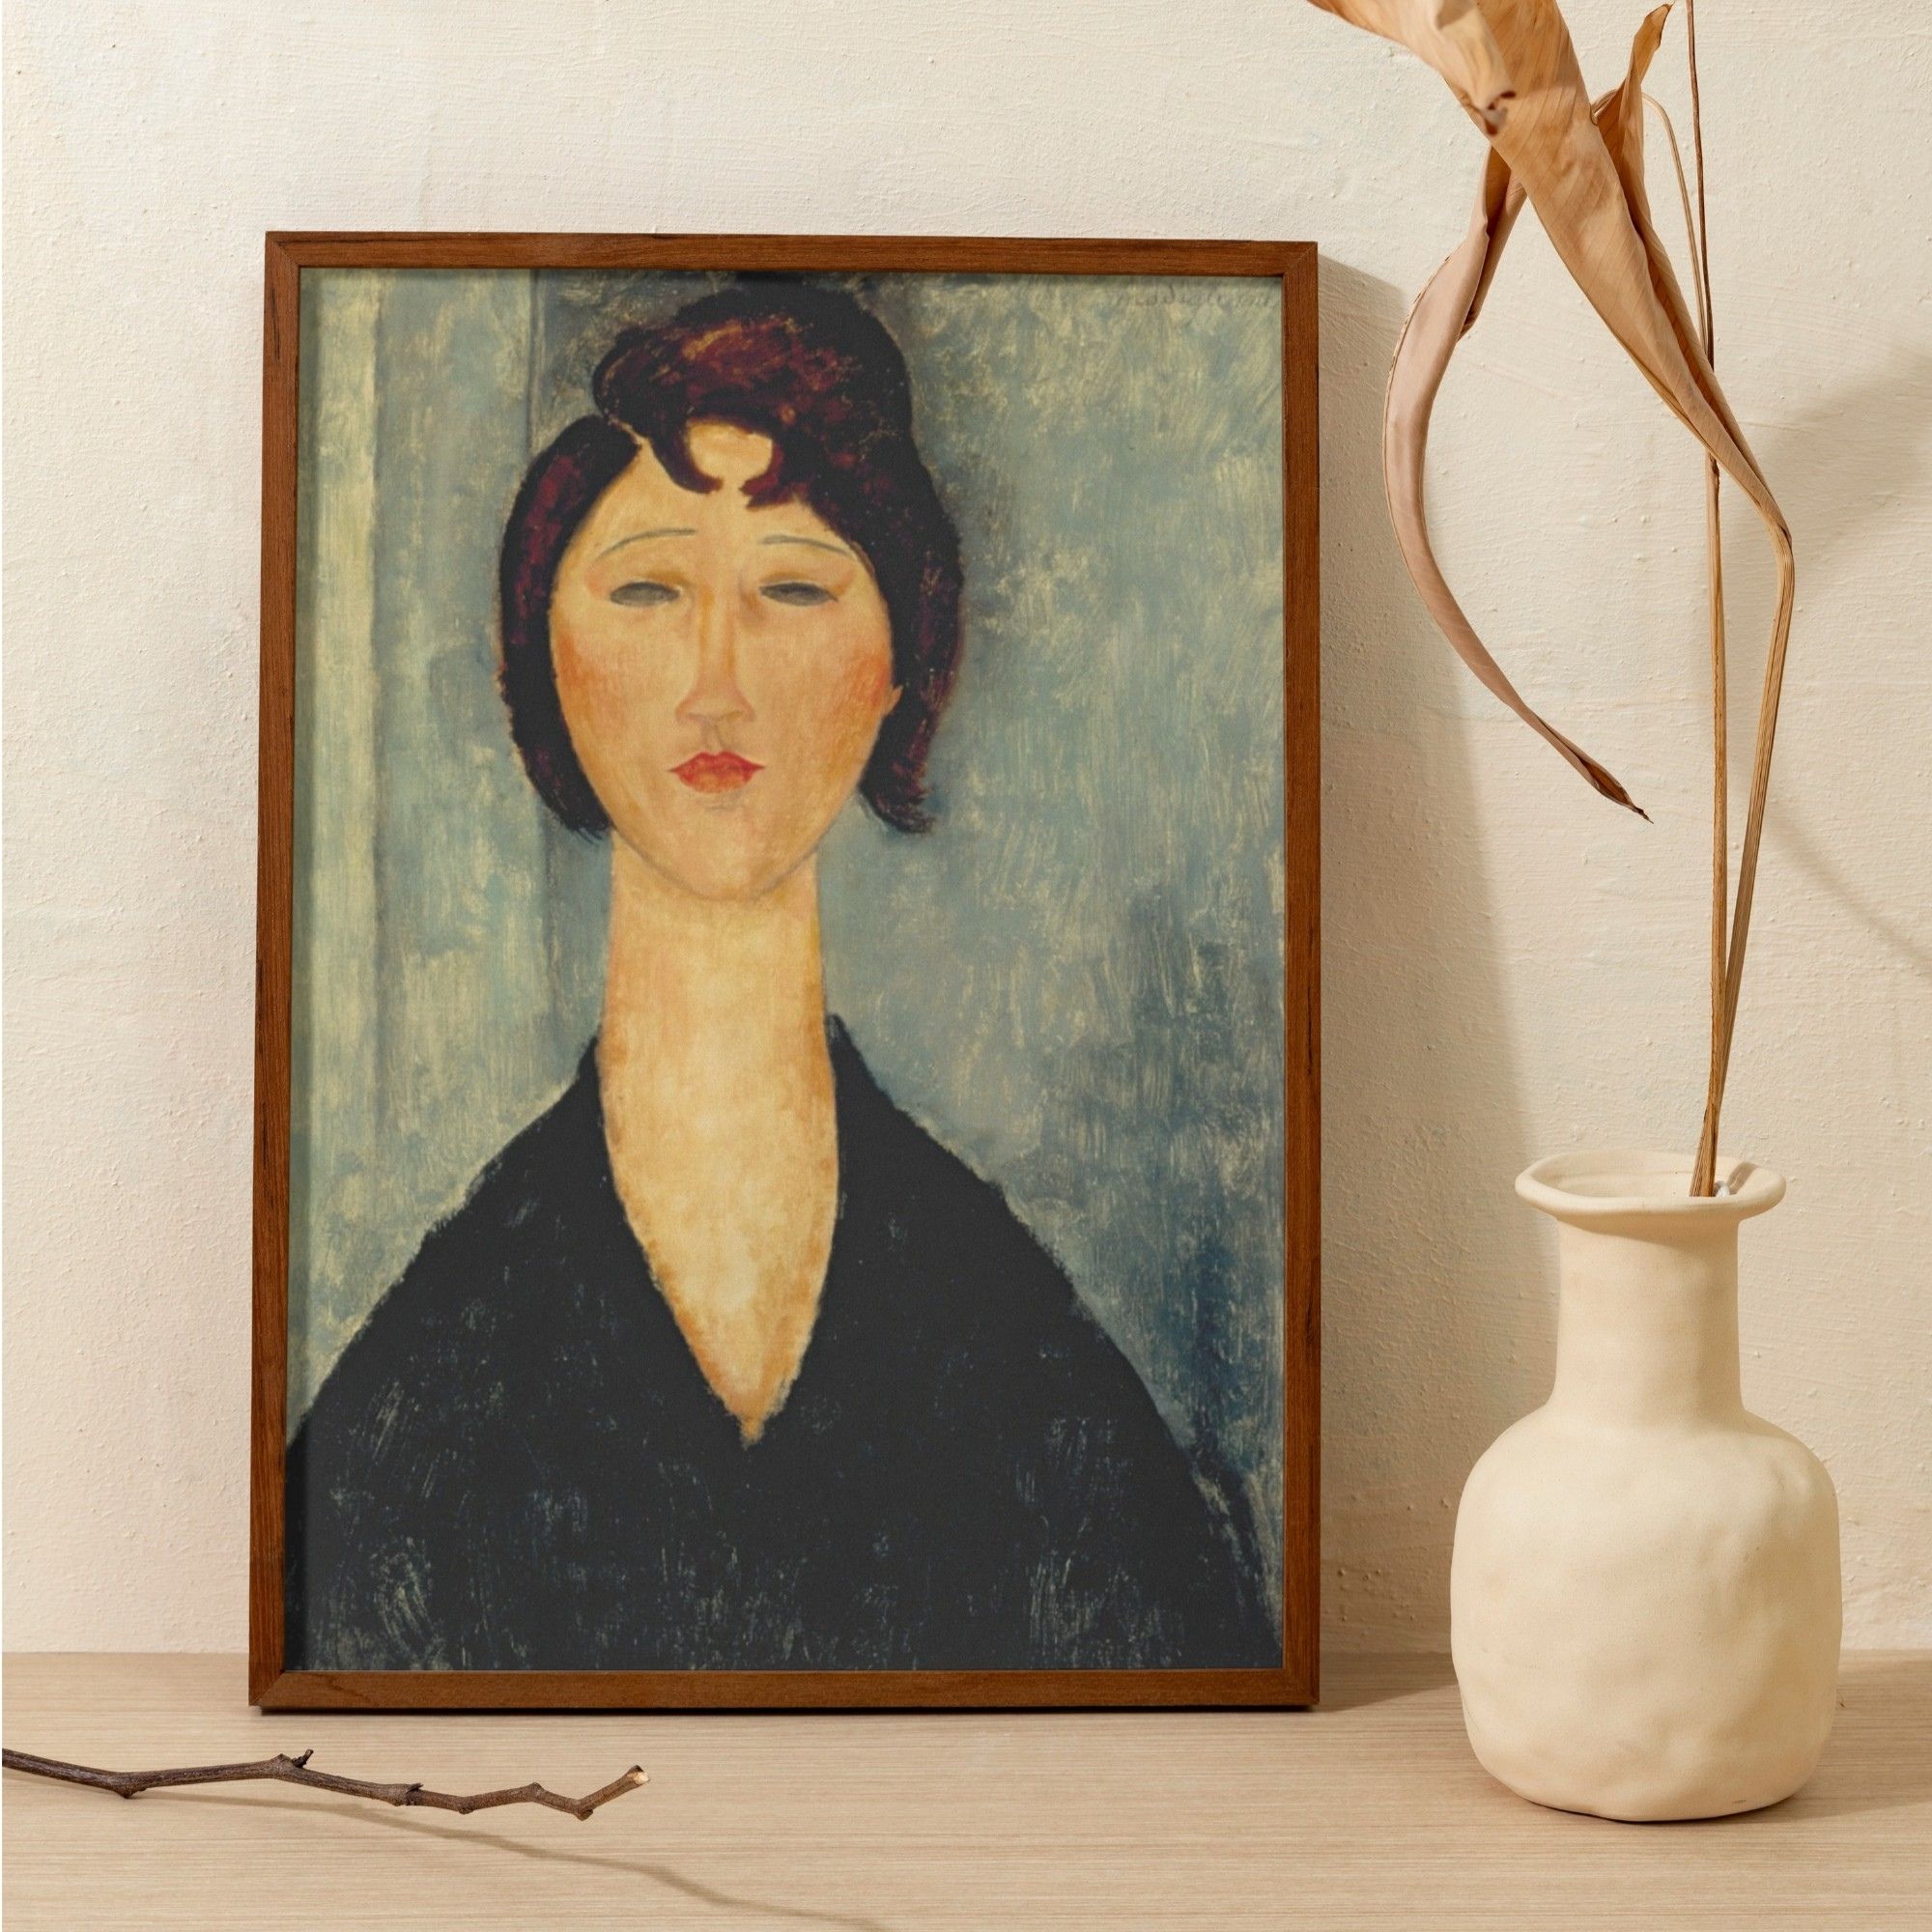 Modigliani's 'Tête de jeune fille', a portrait of a young woman with subdued expression, her dark hair contrasting with her pale skin and a deep black garment. The subject's serene demeanor and Modigliani's distinct style of elongated neck and face are highlighted against a soft, textured background.